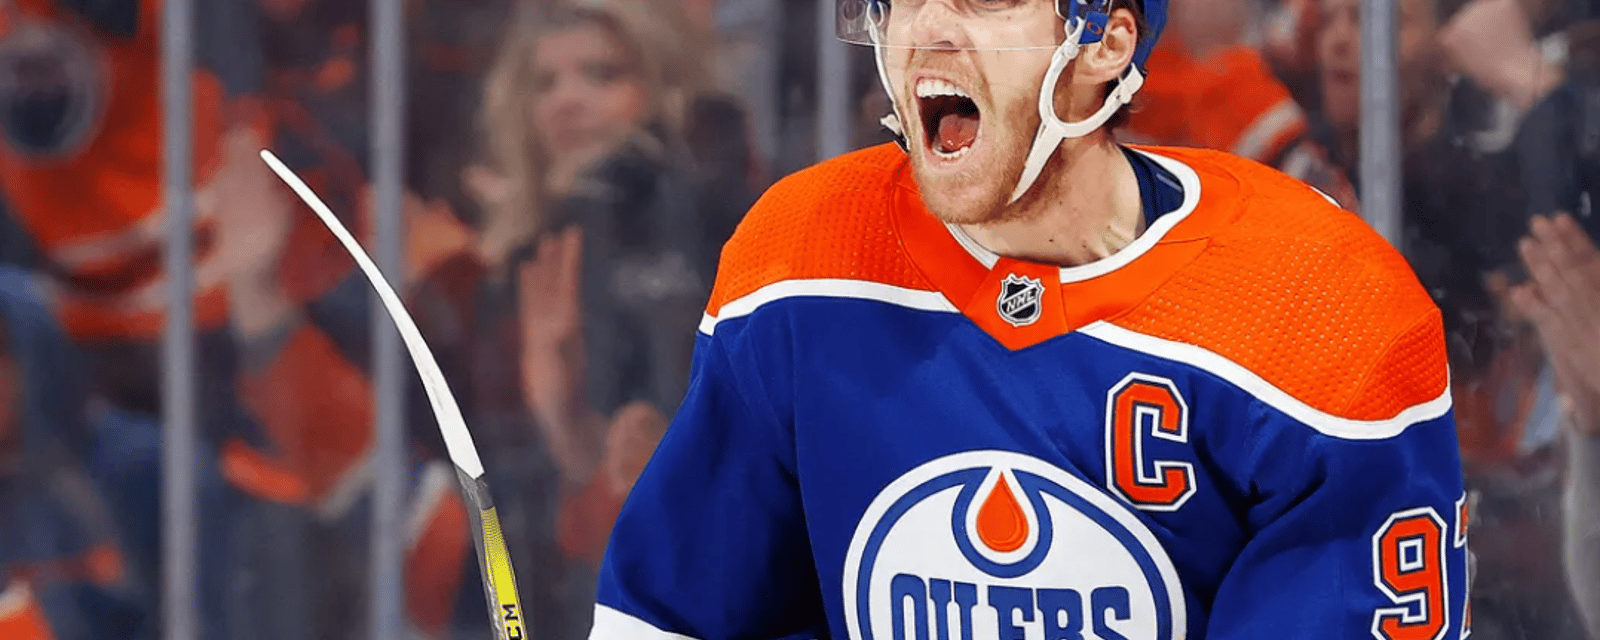 Latest video of Connor McDavid worries Oilers fans 